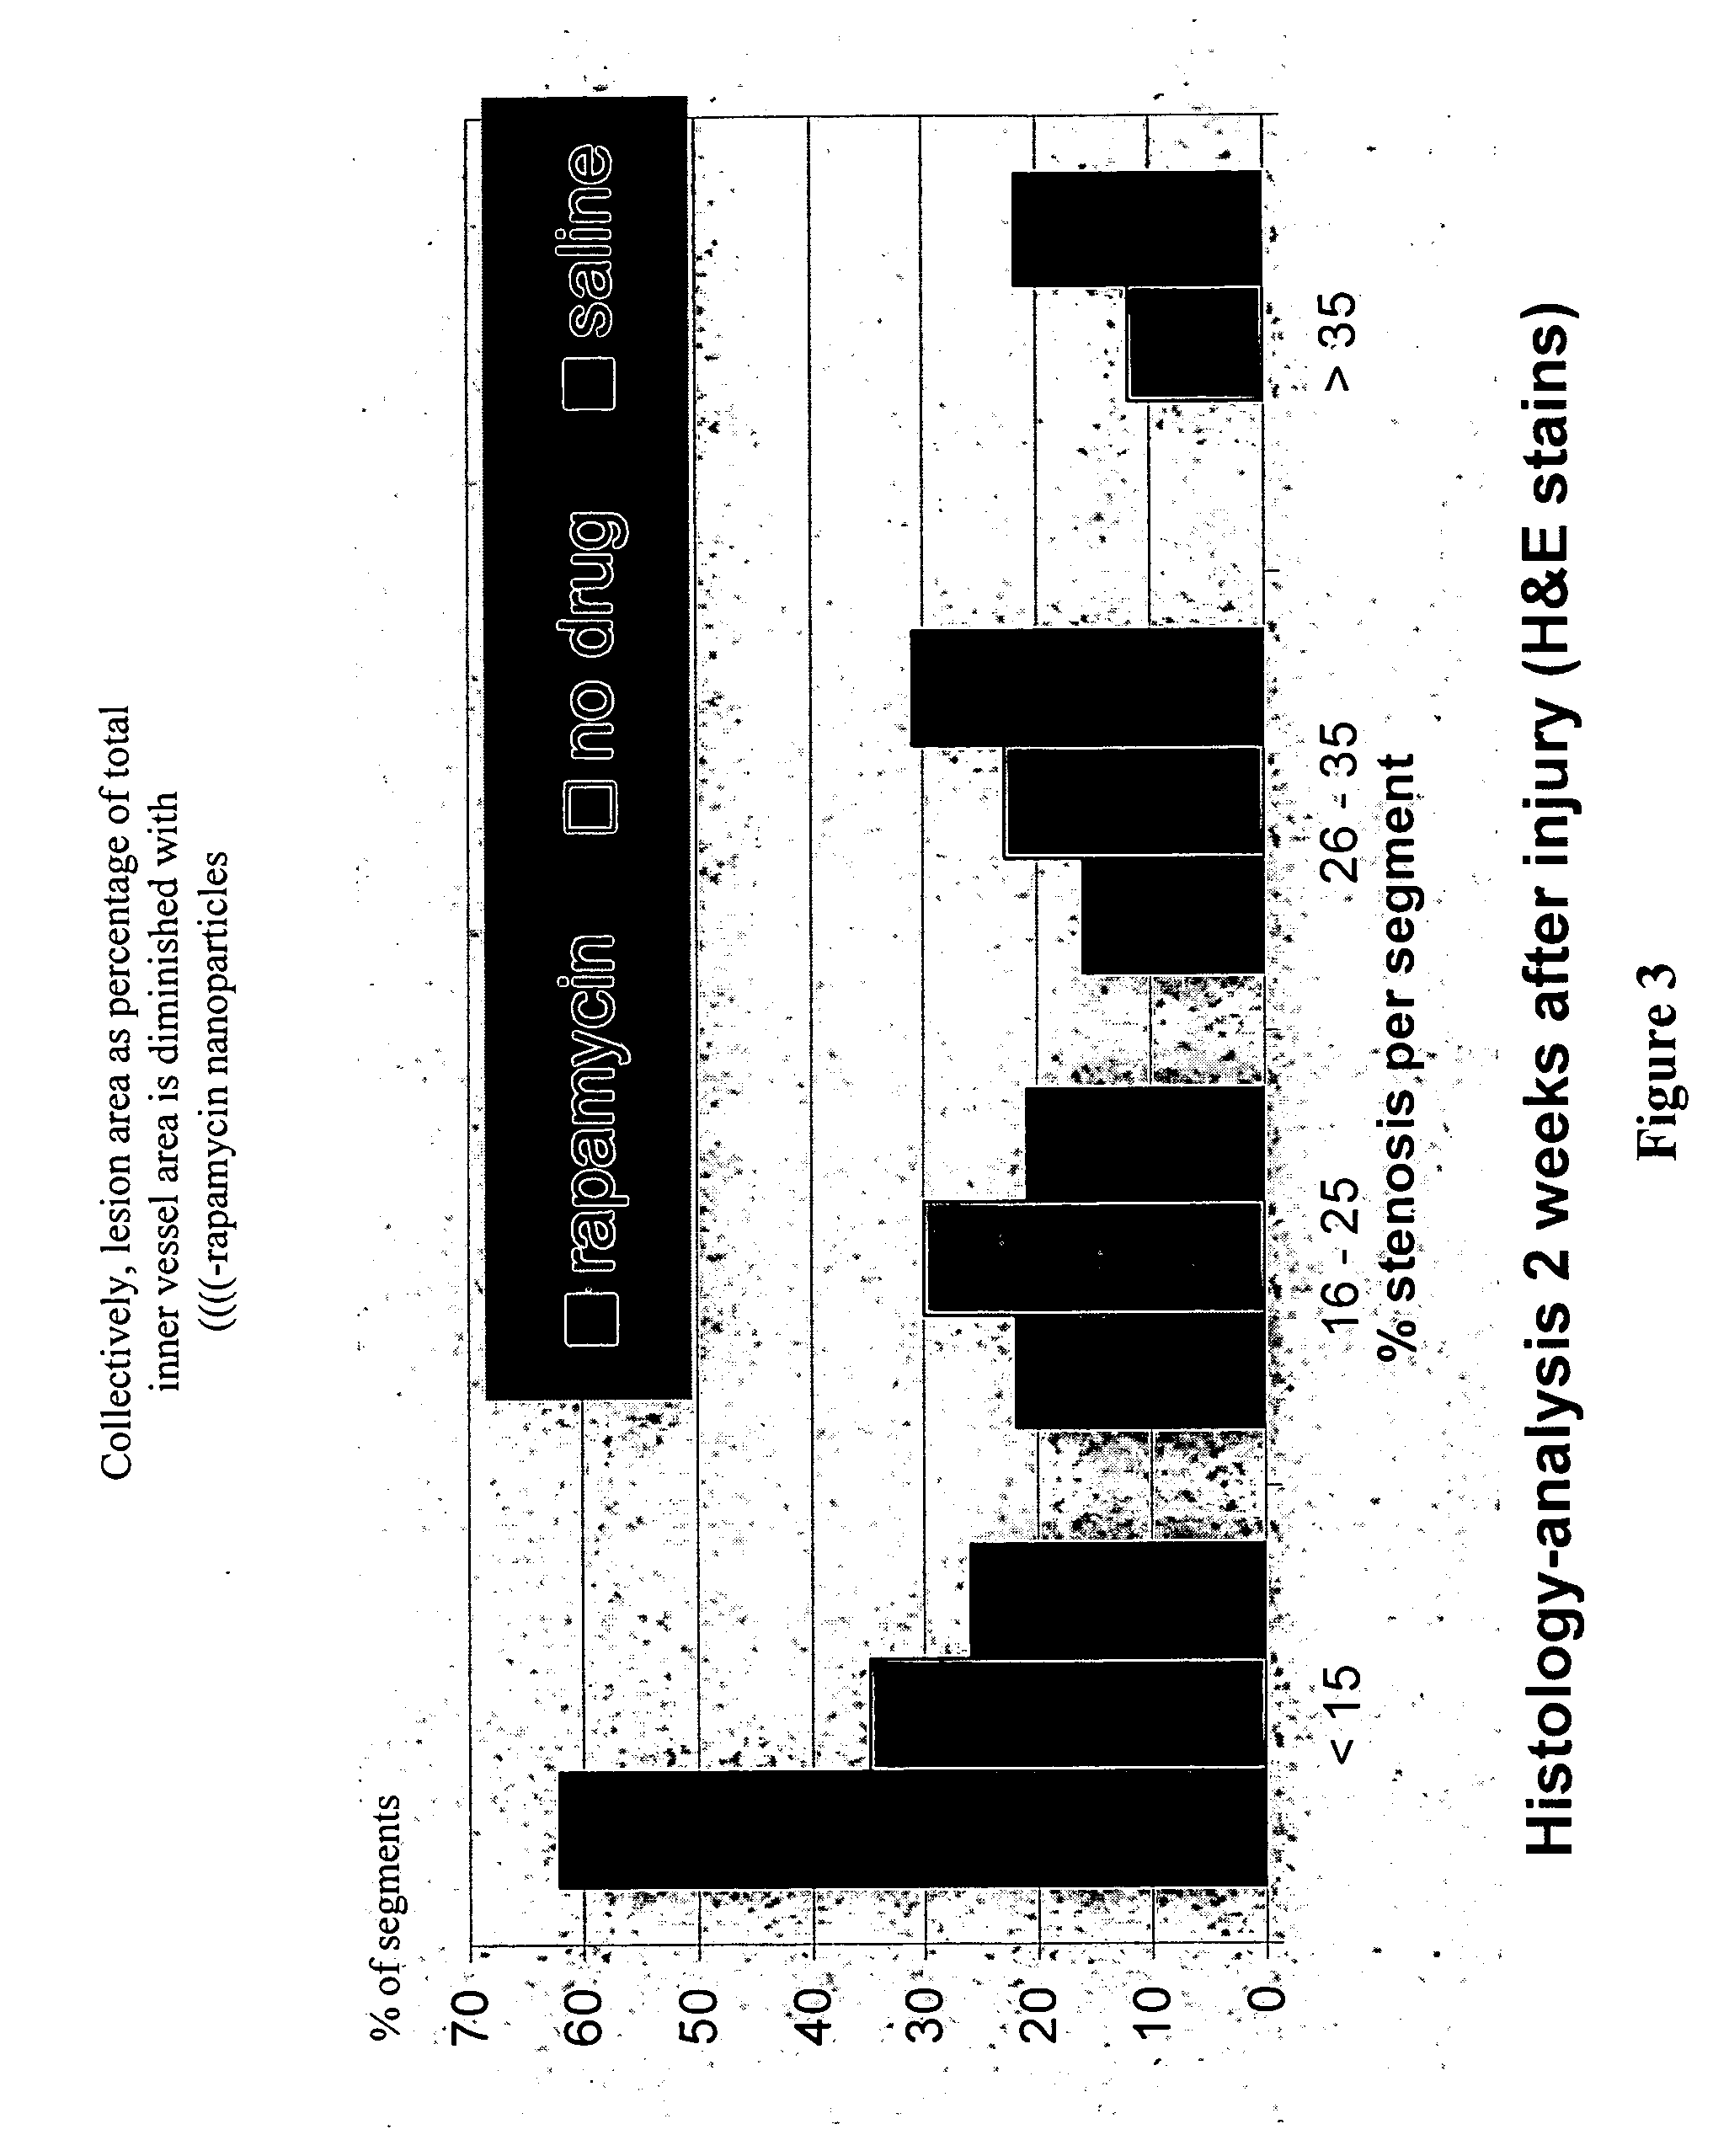 Methods to ameliorate and image angioplasty-induced vascular injury